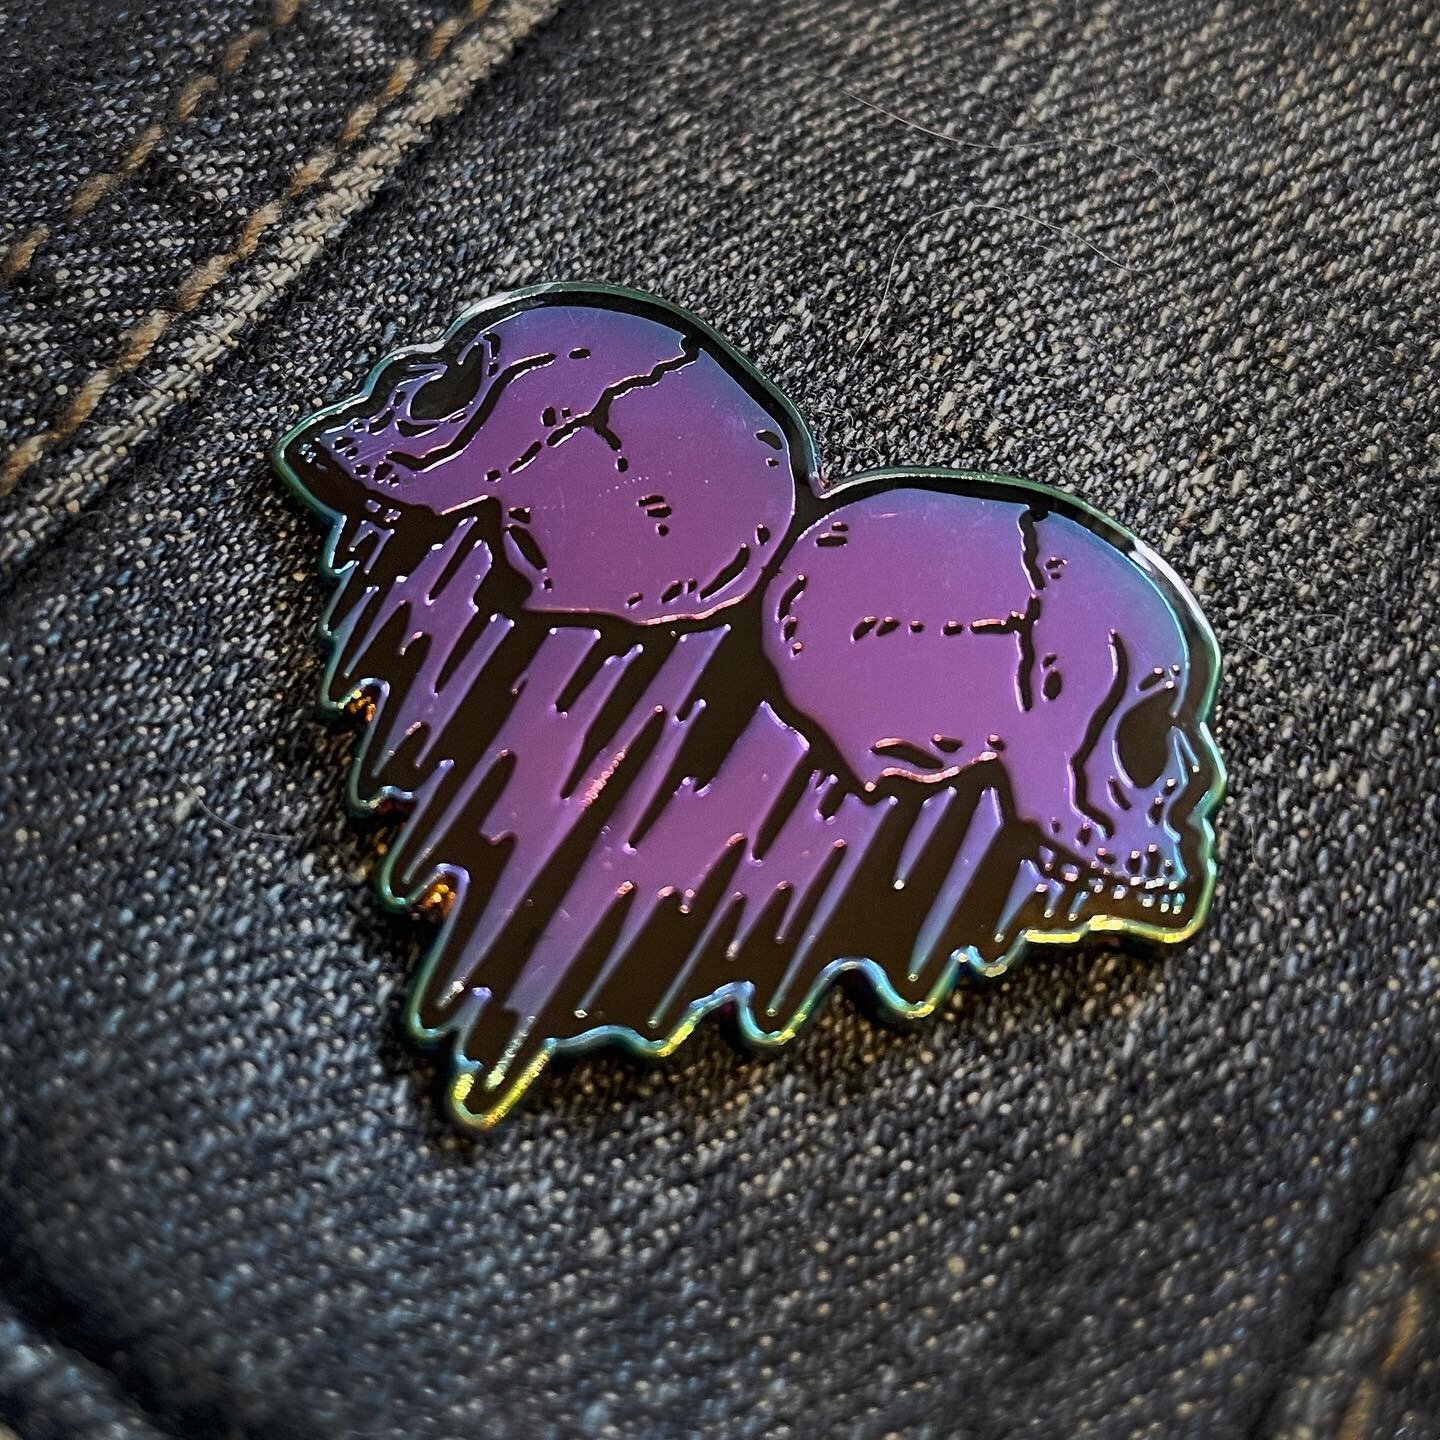 New pins!  I&rsquo;m so excited about these!  I&rsquo;ve wanted to make a rainbow metal pin forever!  So here it is:  the new edition of my Two Skulls  design!  Available now! And even in time for the holidays!
.
.

#darkartist #darkartwork #enamelpi